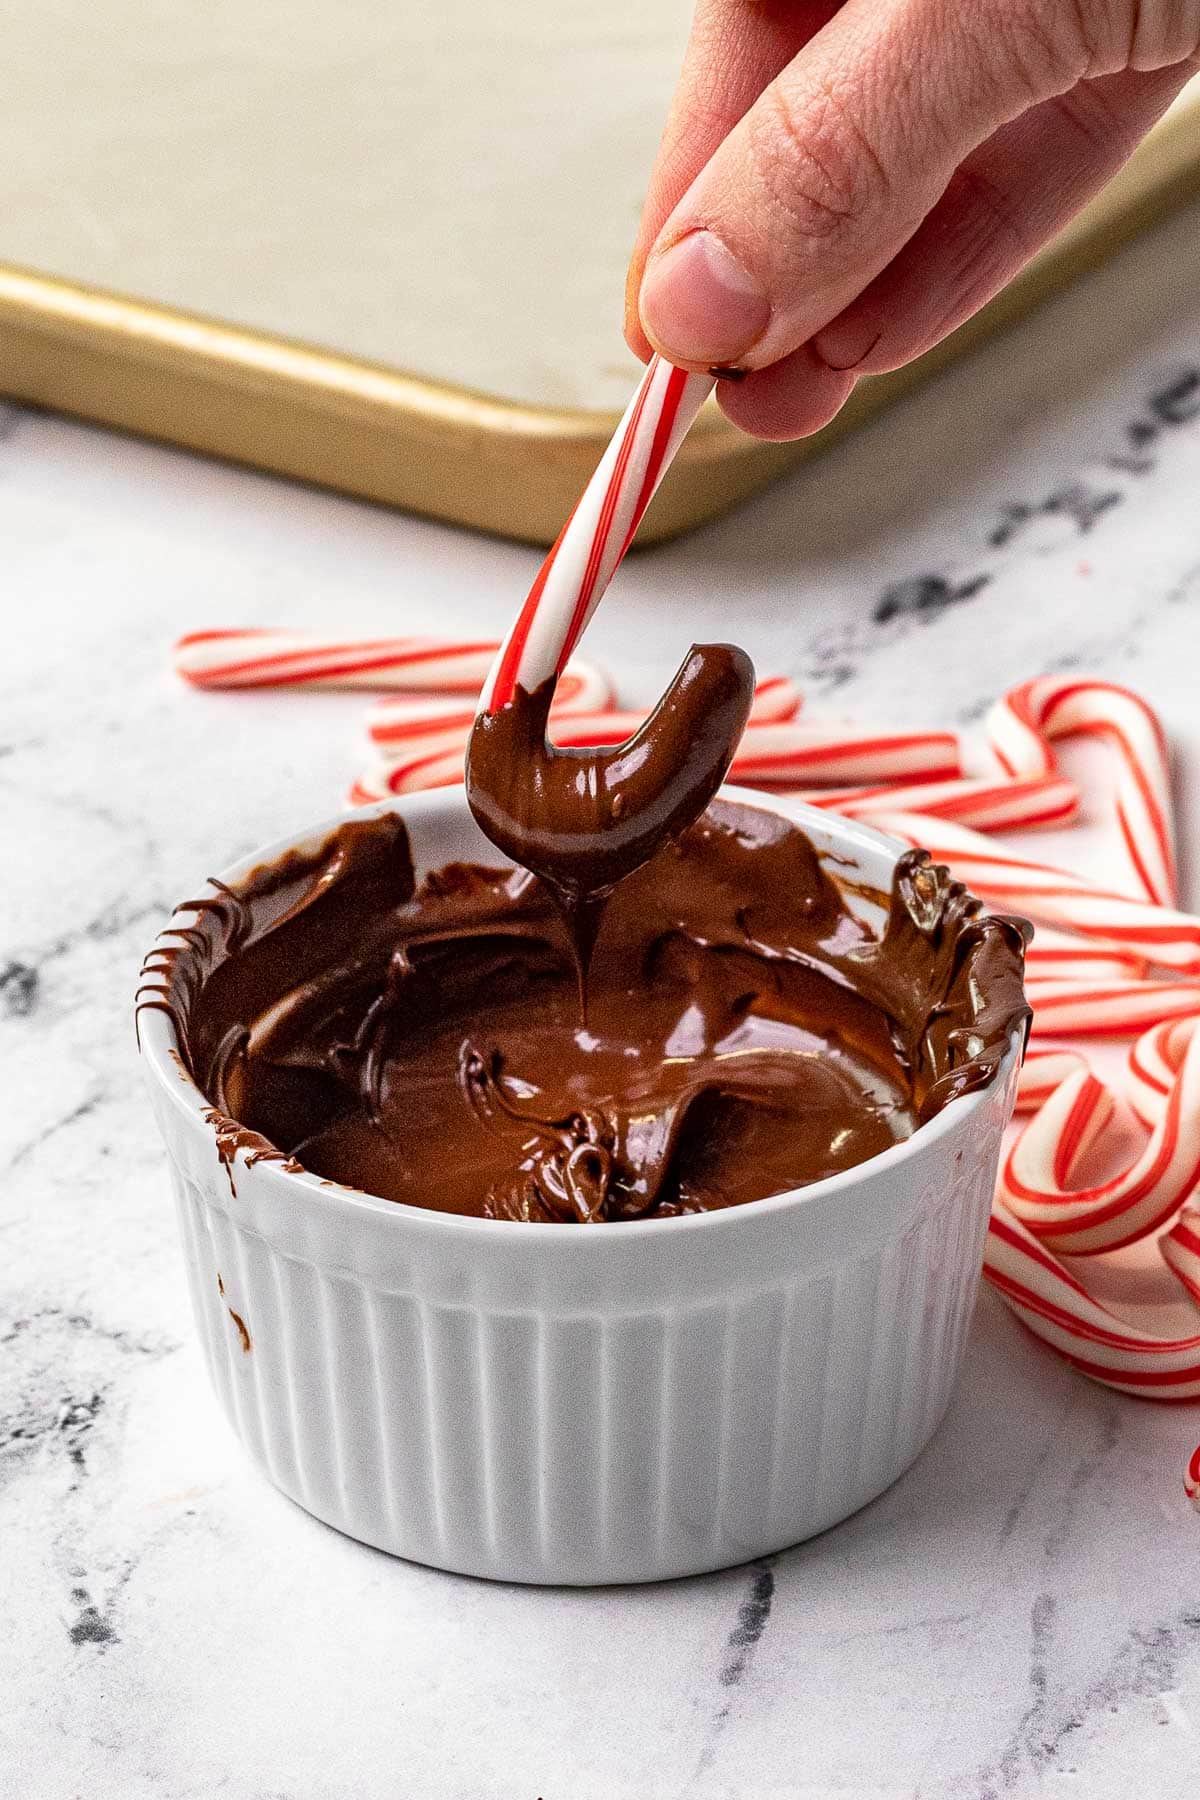 Chocolate Dipped Candy Canes dipping into chocolate